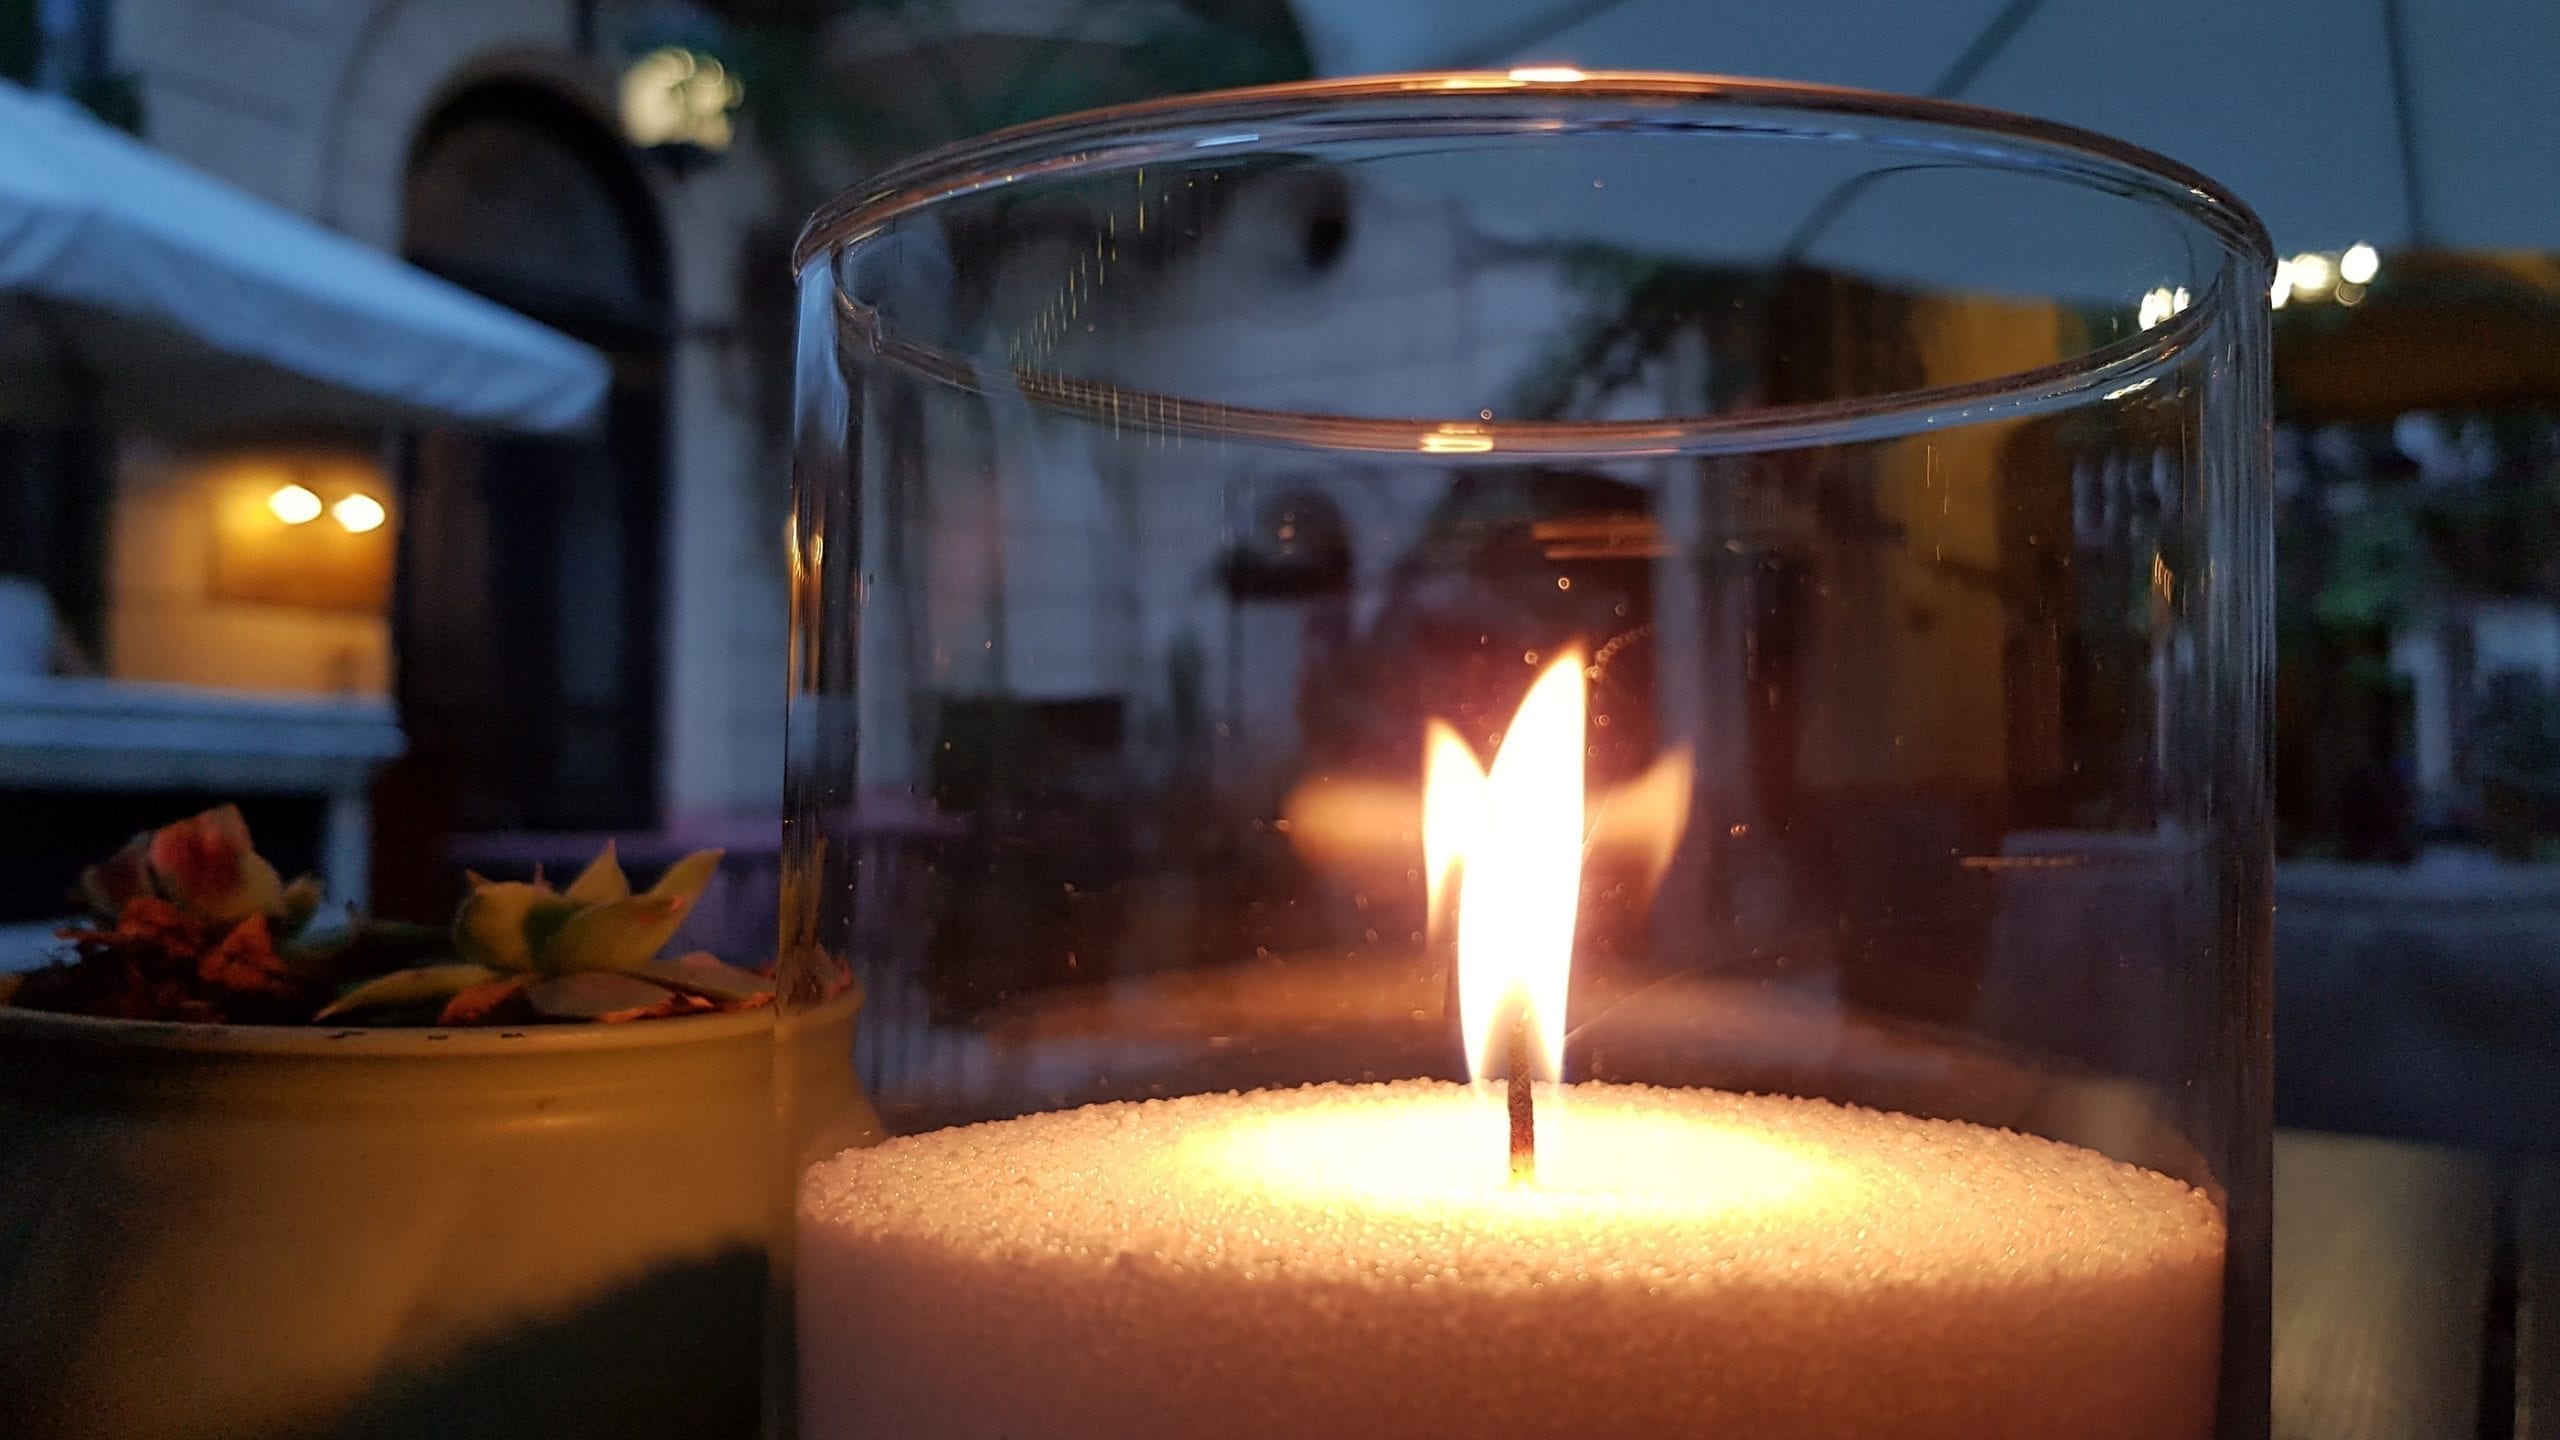 38,000 Holiday Candles Recalled for Potential Fires and Burn Injuries